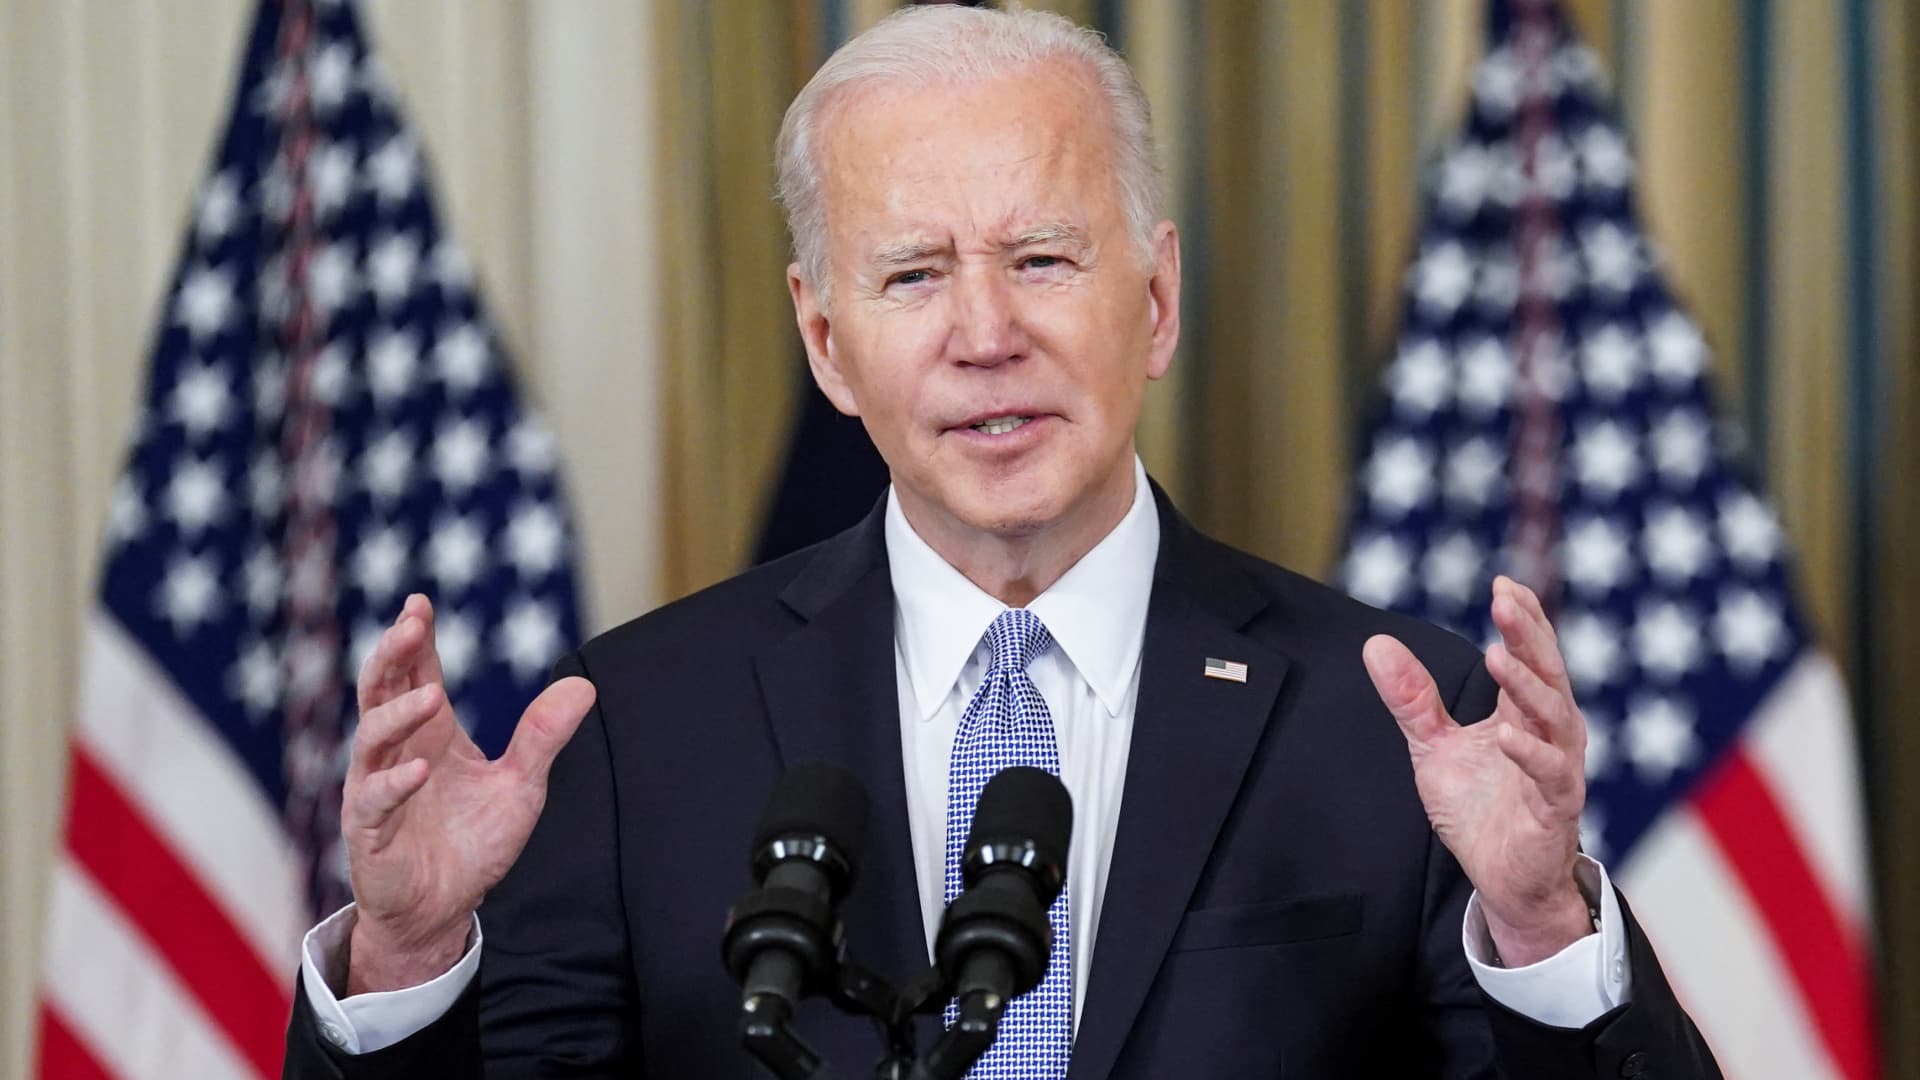 U.S. President Joe Biden delivers remarks on the March jobs report, during a speech in the State Dining Room at the White House in Washington, U.S., April 1, 2022.